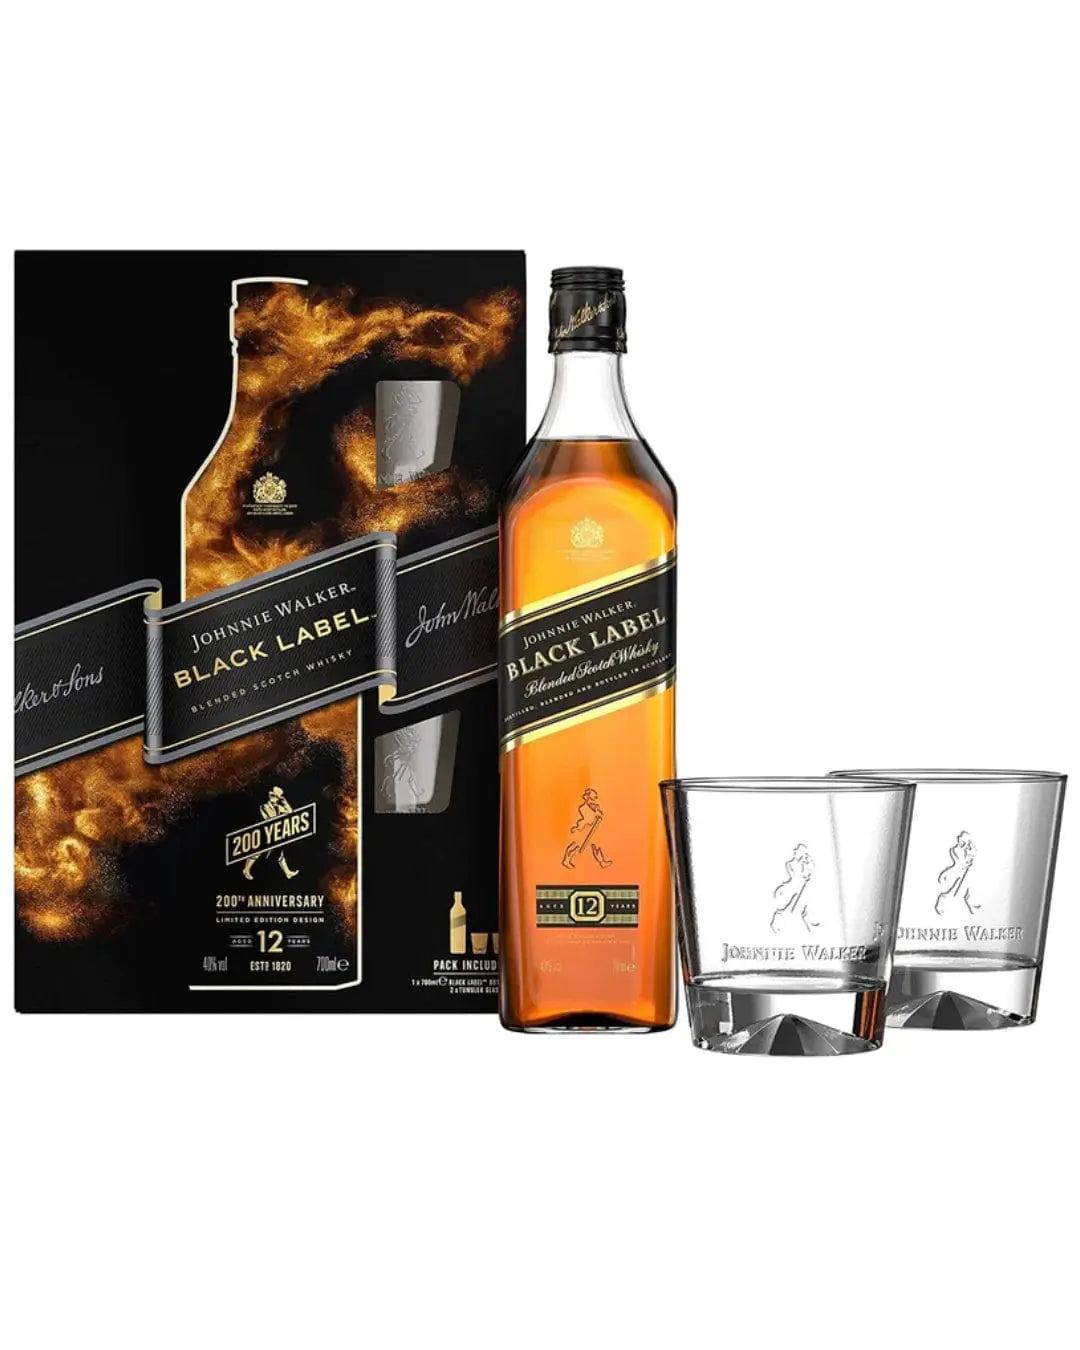 Johnnie Walker Black Label 200th Anniversary Gift Pack, 70 cl Whisky